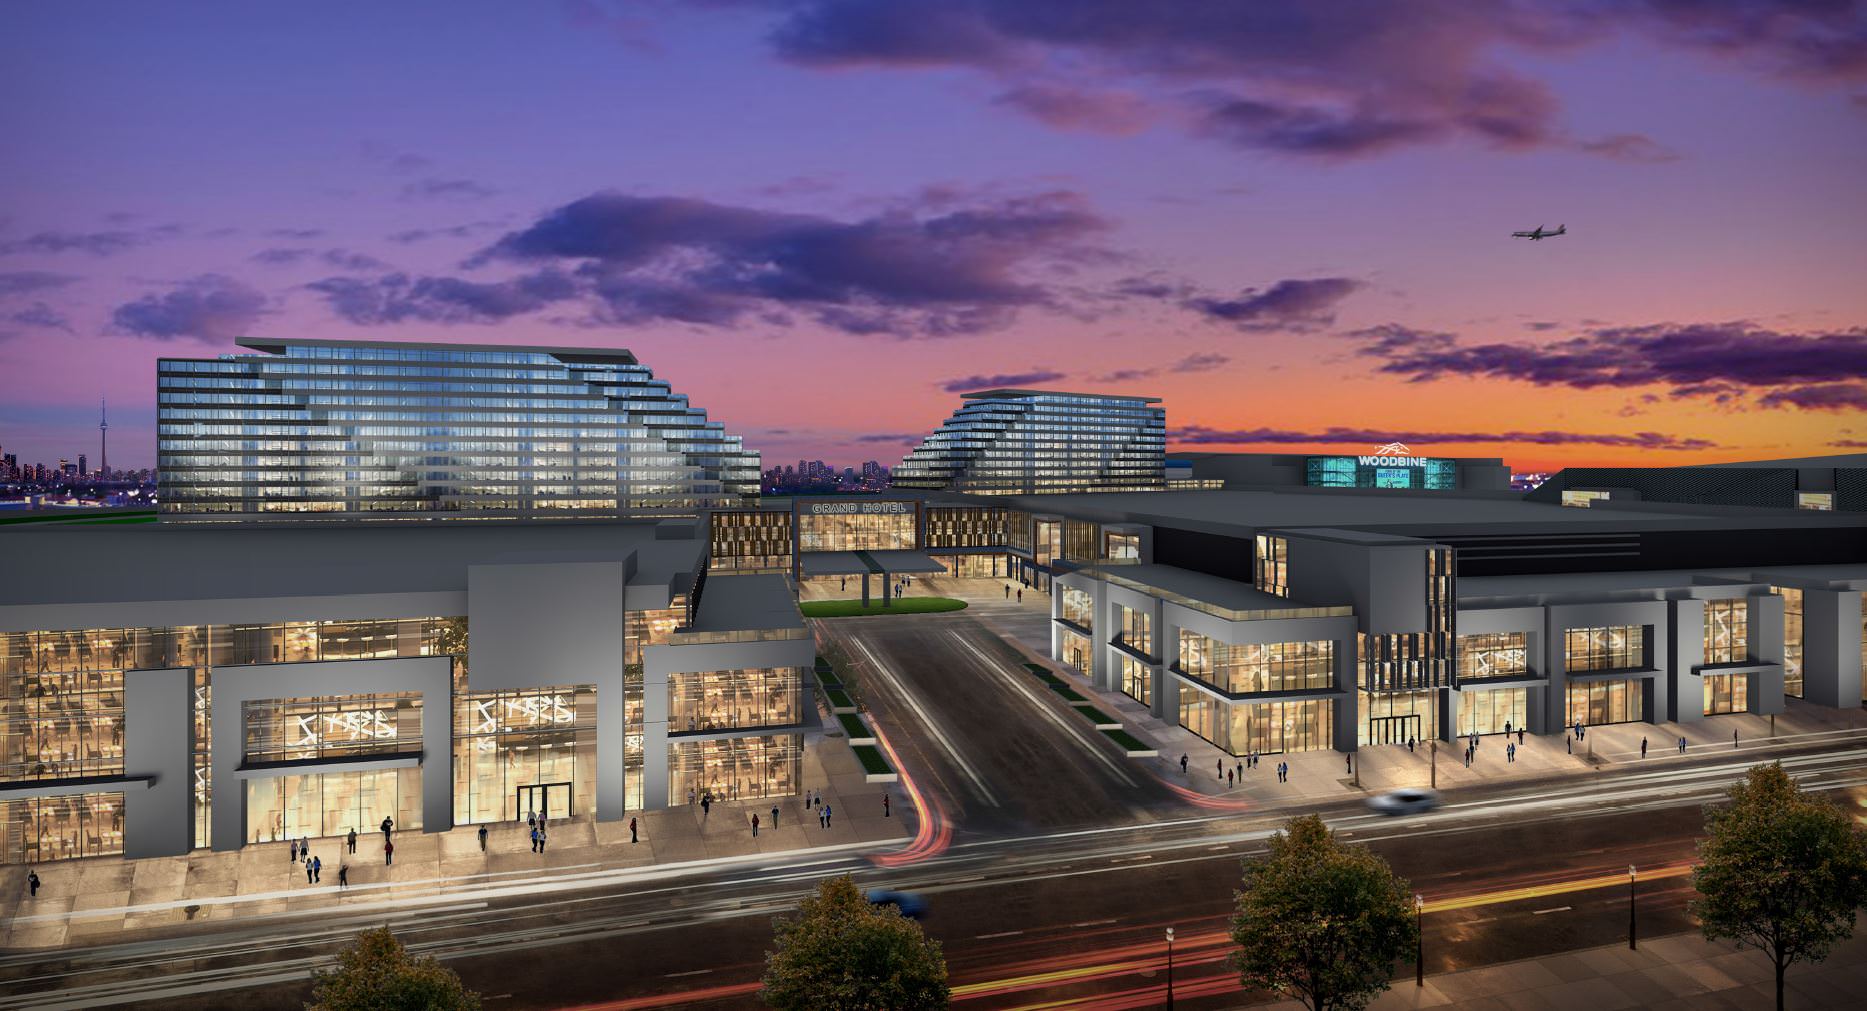 Woodbine casino expansion timeline of events